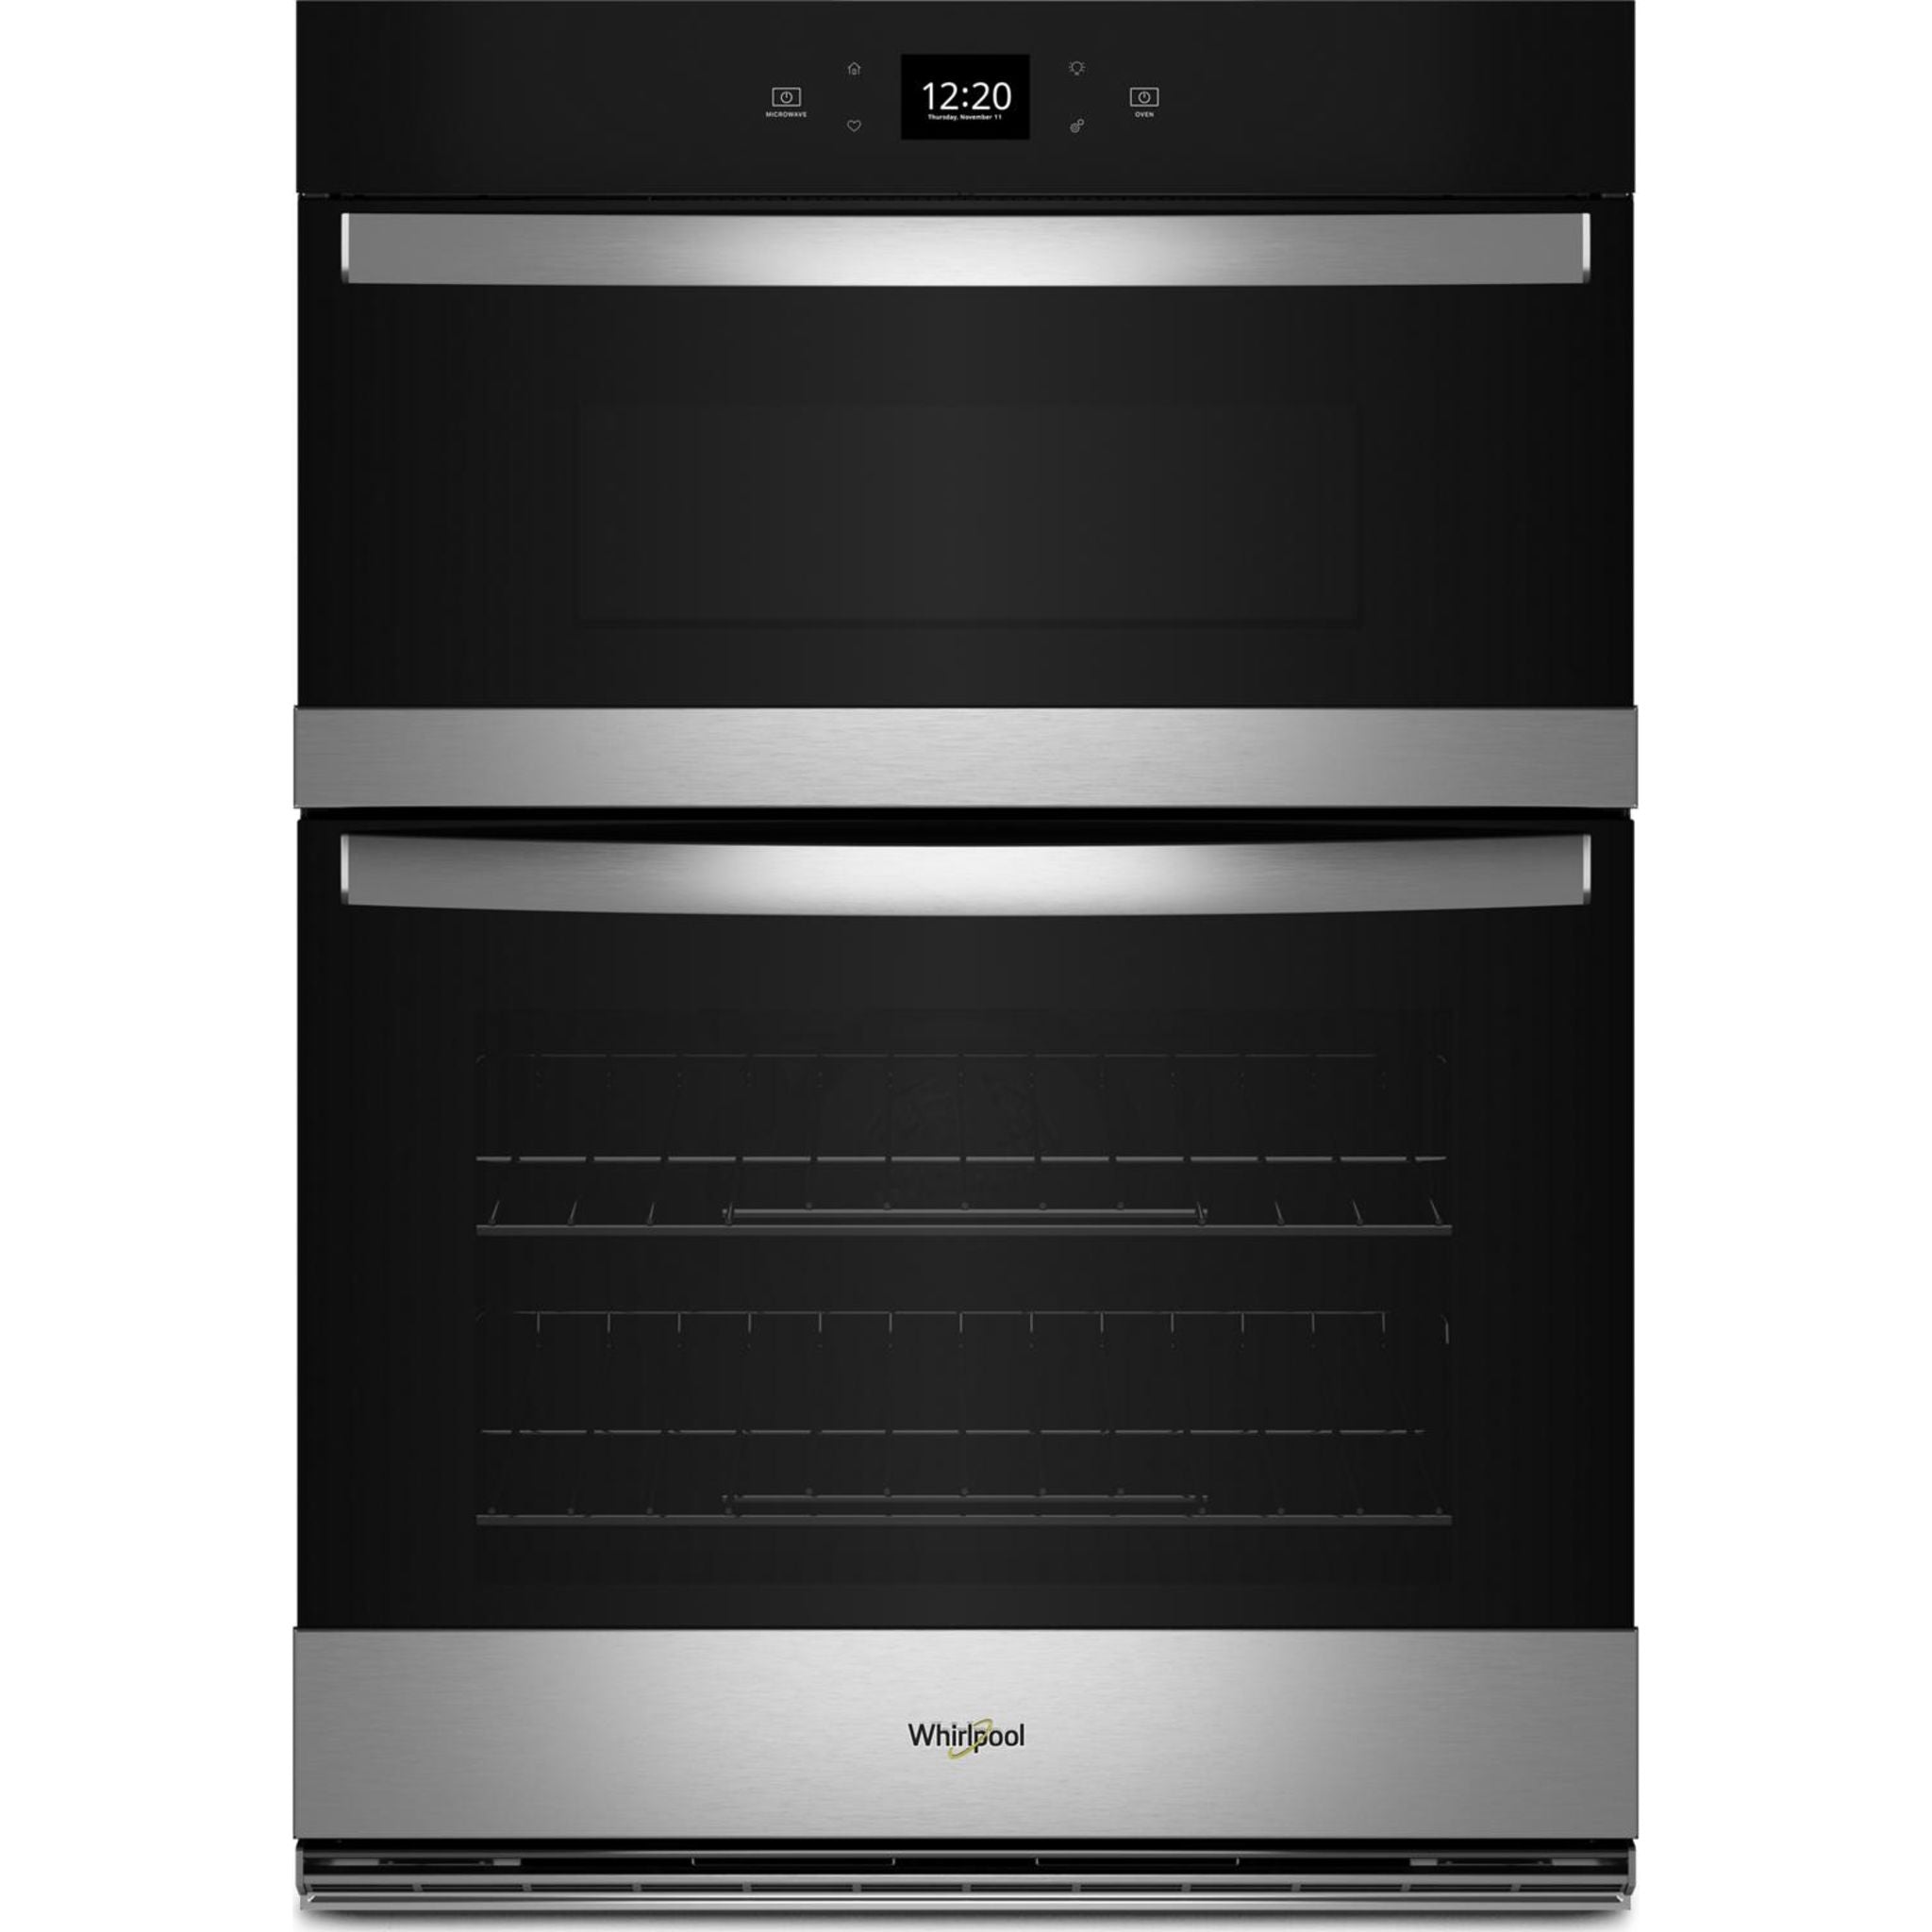 Whirlpool, Whirlpool 27" Convection Wall Oven (WOEC5027LZ) - Fingerprint Resistant Stainless Steel